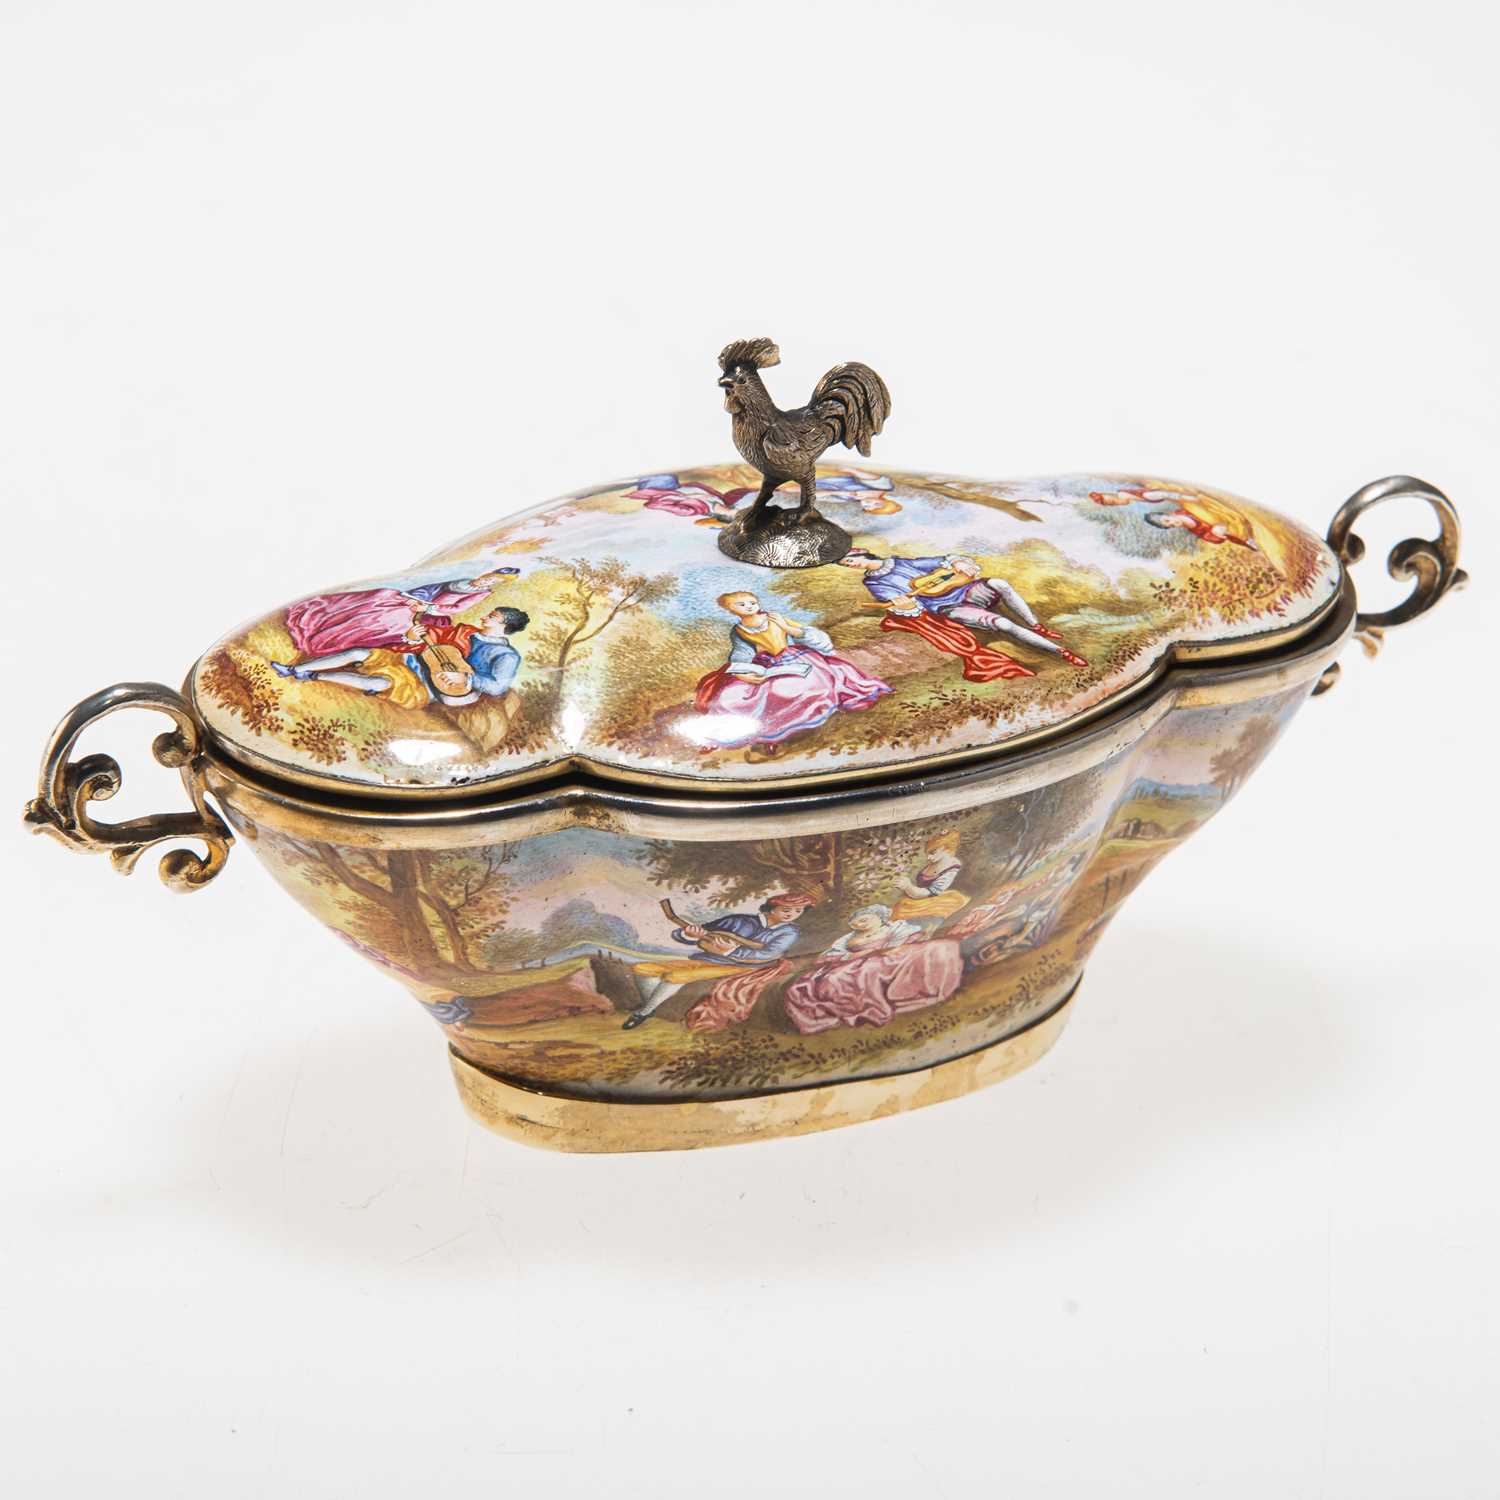 A VIENNESE ENAMEL AND SILVER-GILT TWO-HANDLED DISH AND COVER